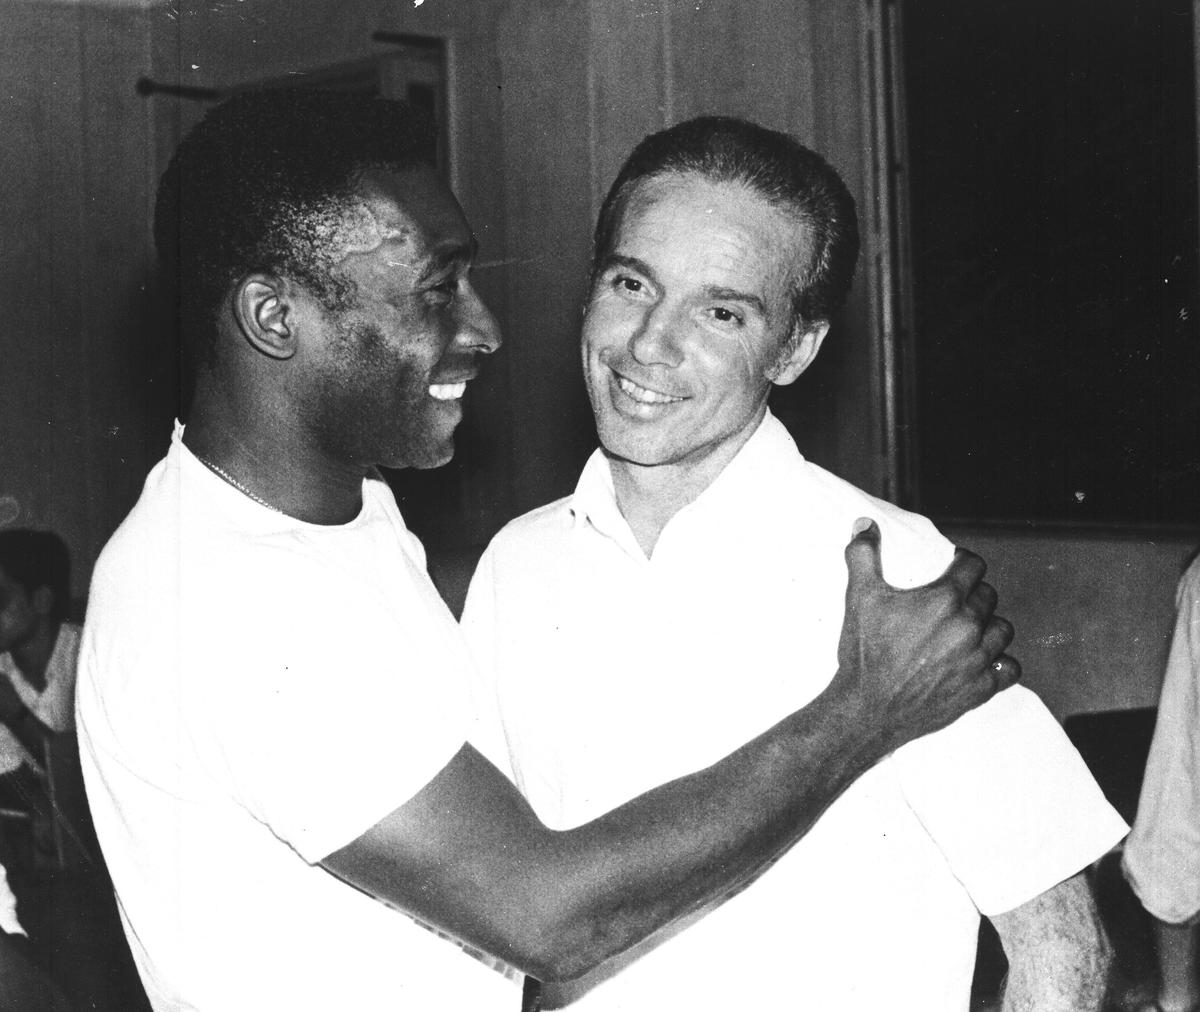 File picture of Pele with Mario Zagallo after the latter’s appointment as coach of the Brazilian national football team, in 1970